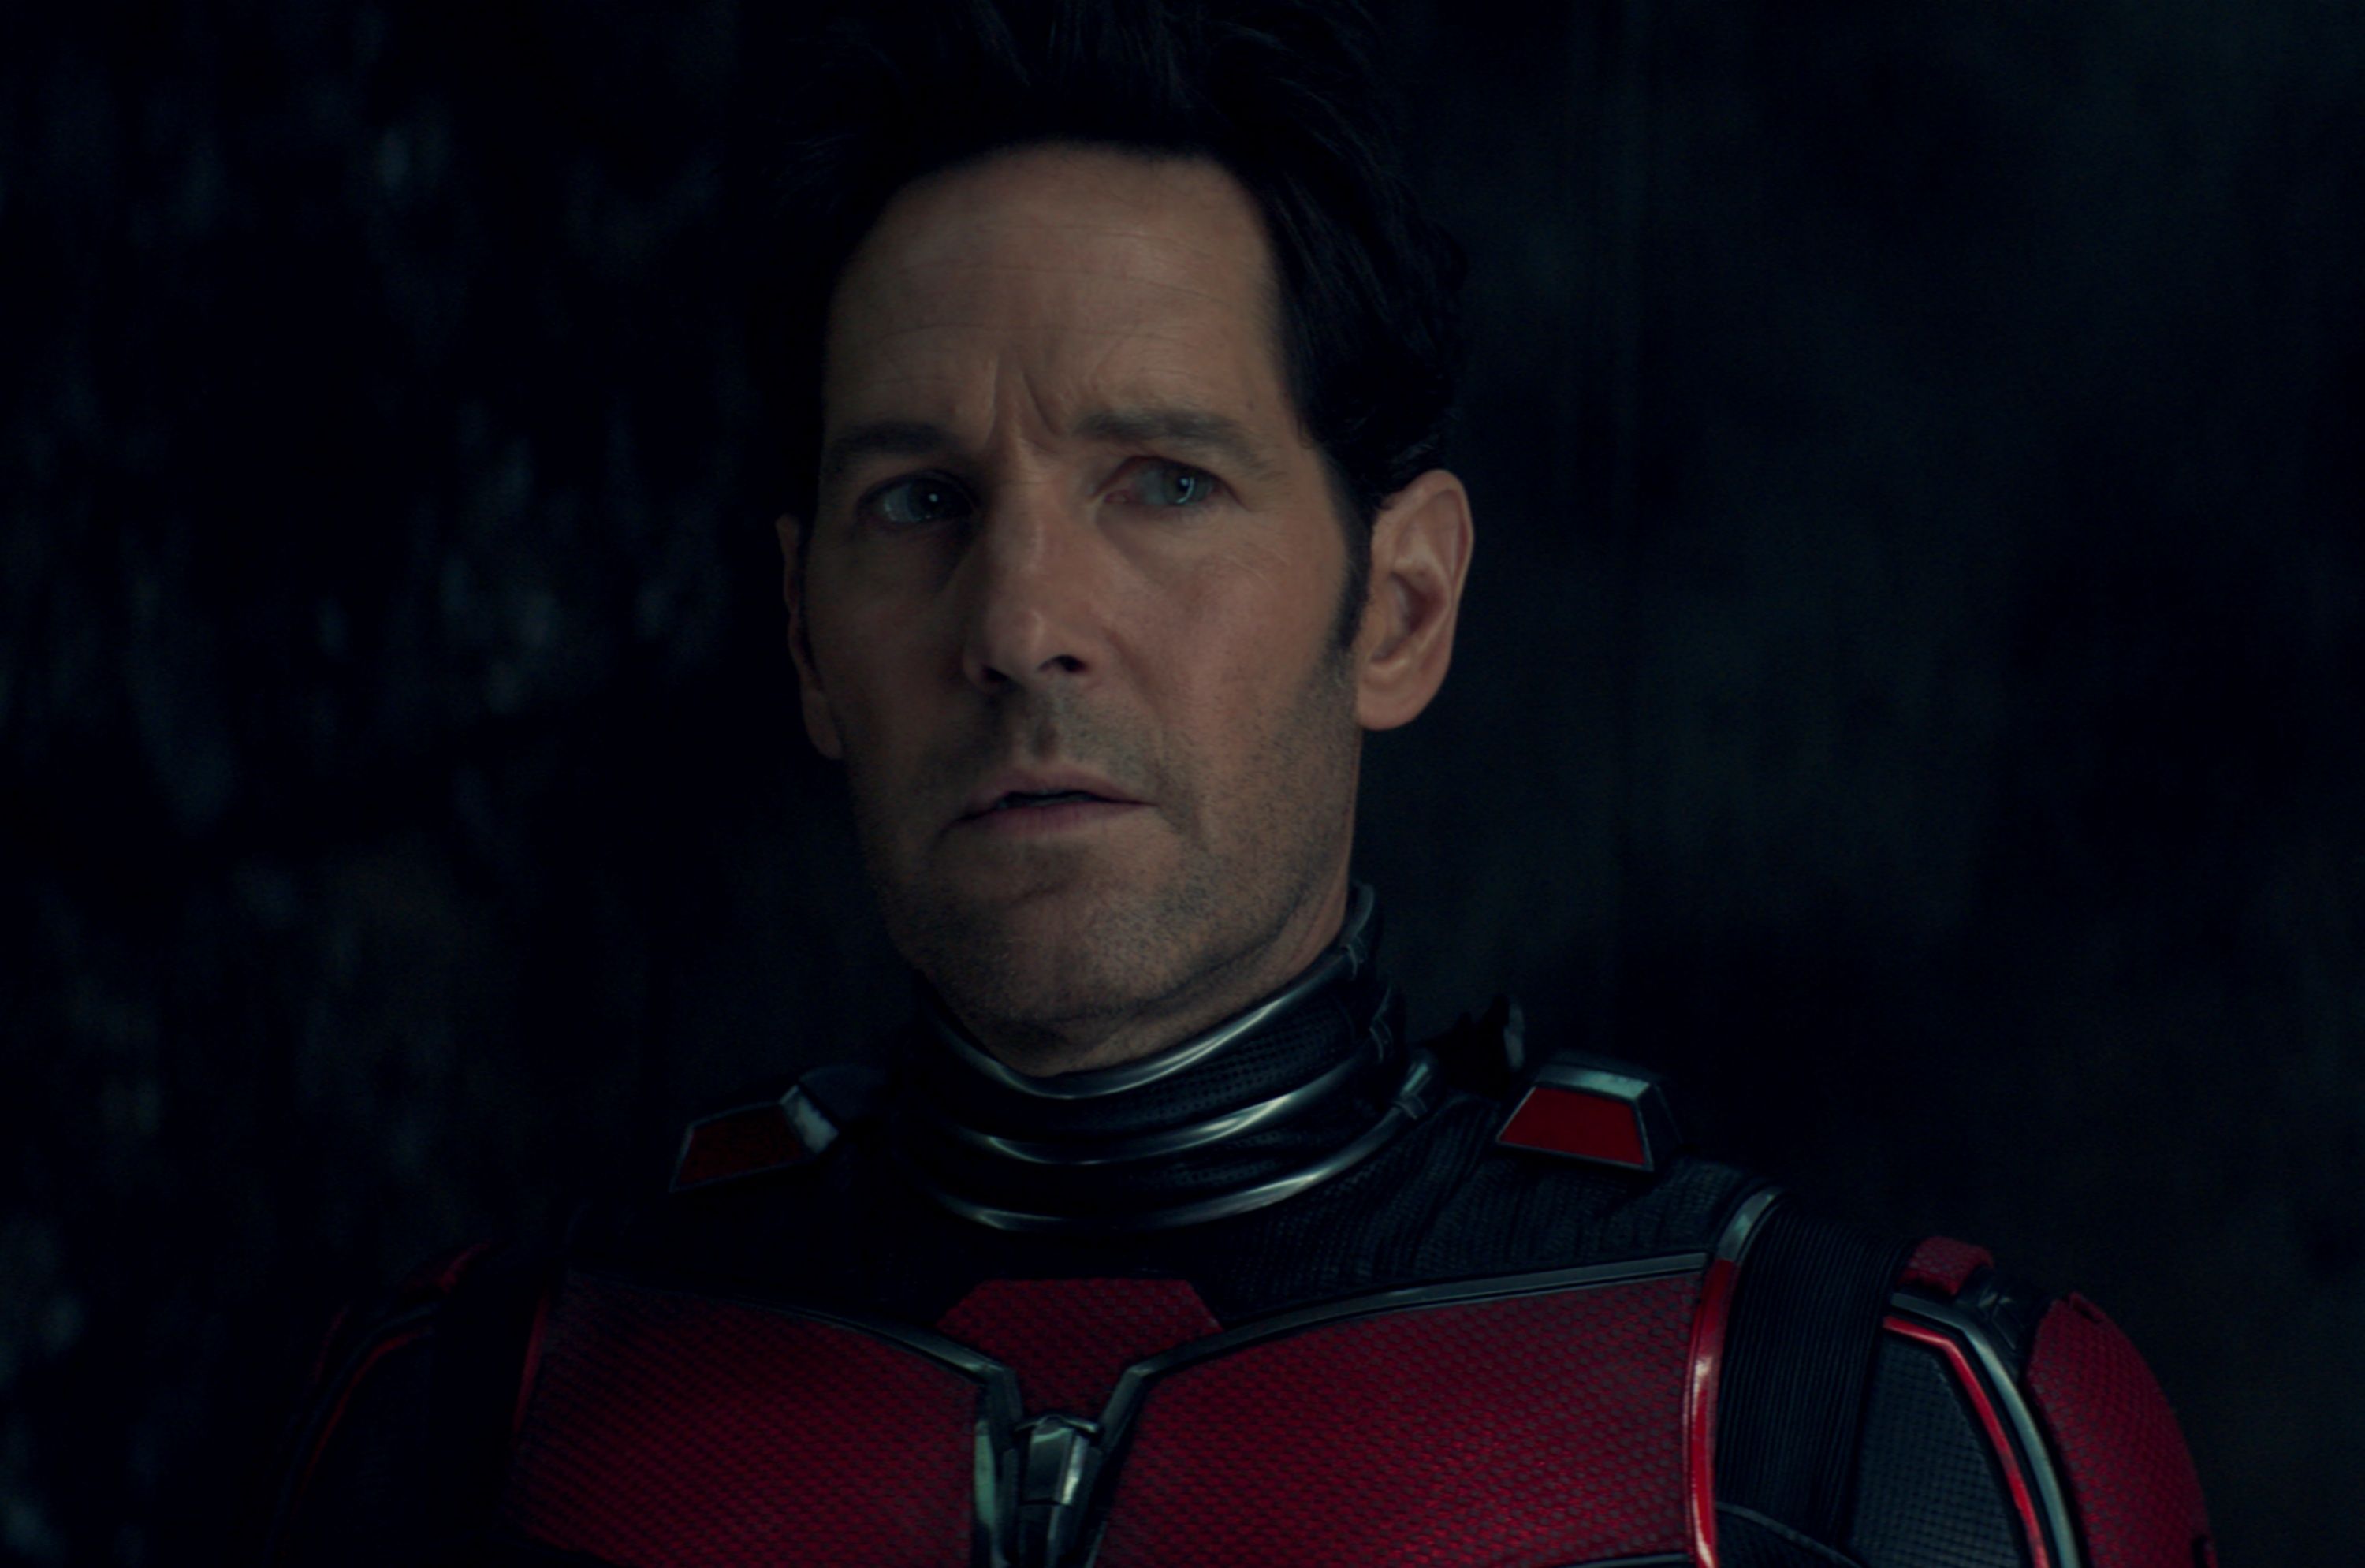 Paul Rudd as Scott Lang in Ant-Man and The Wasp: Quantumania